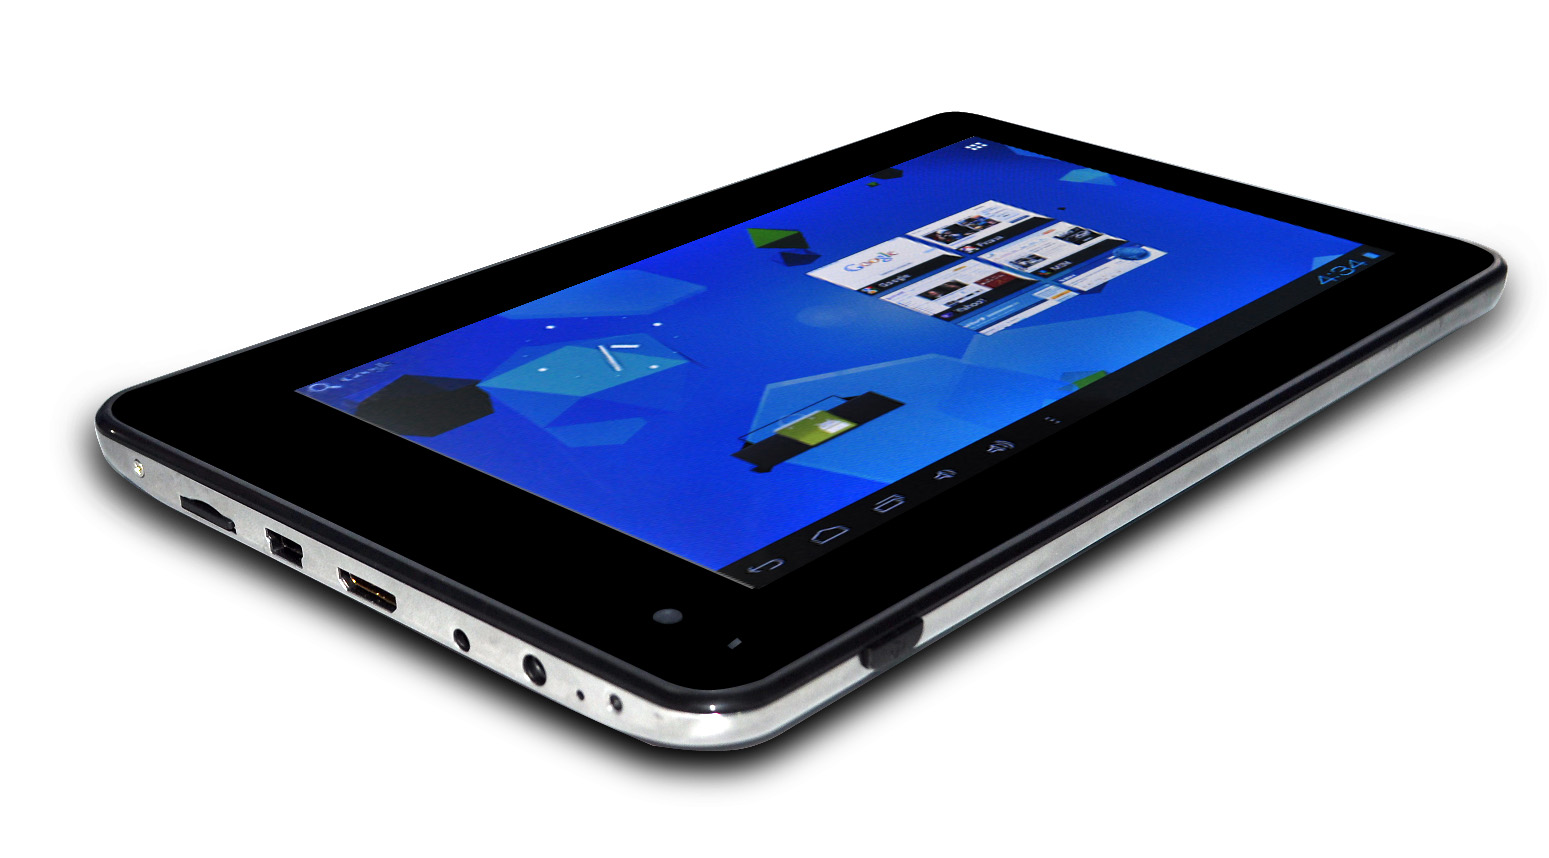 Metal-Cover-7inch-Via8850-Capacitive-5points-Touch-Tablet-PC-B56